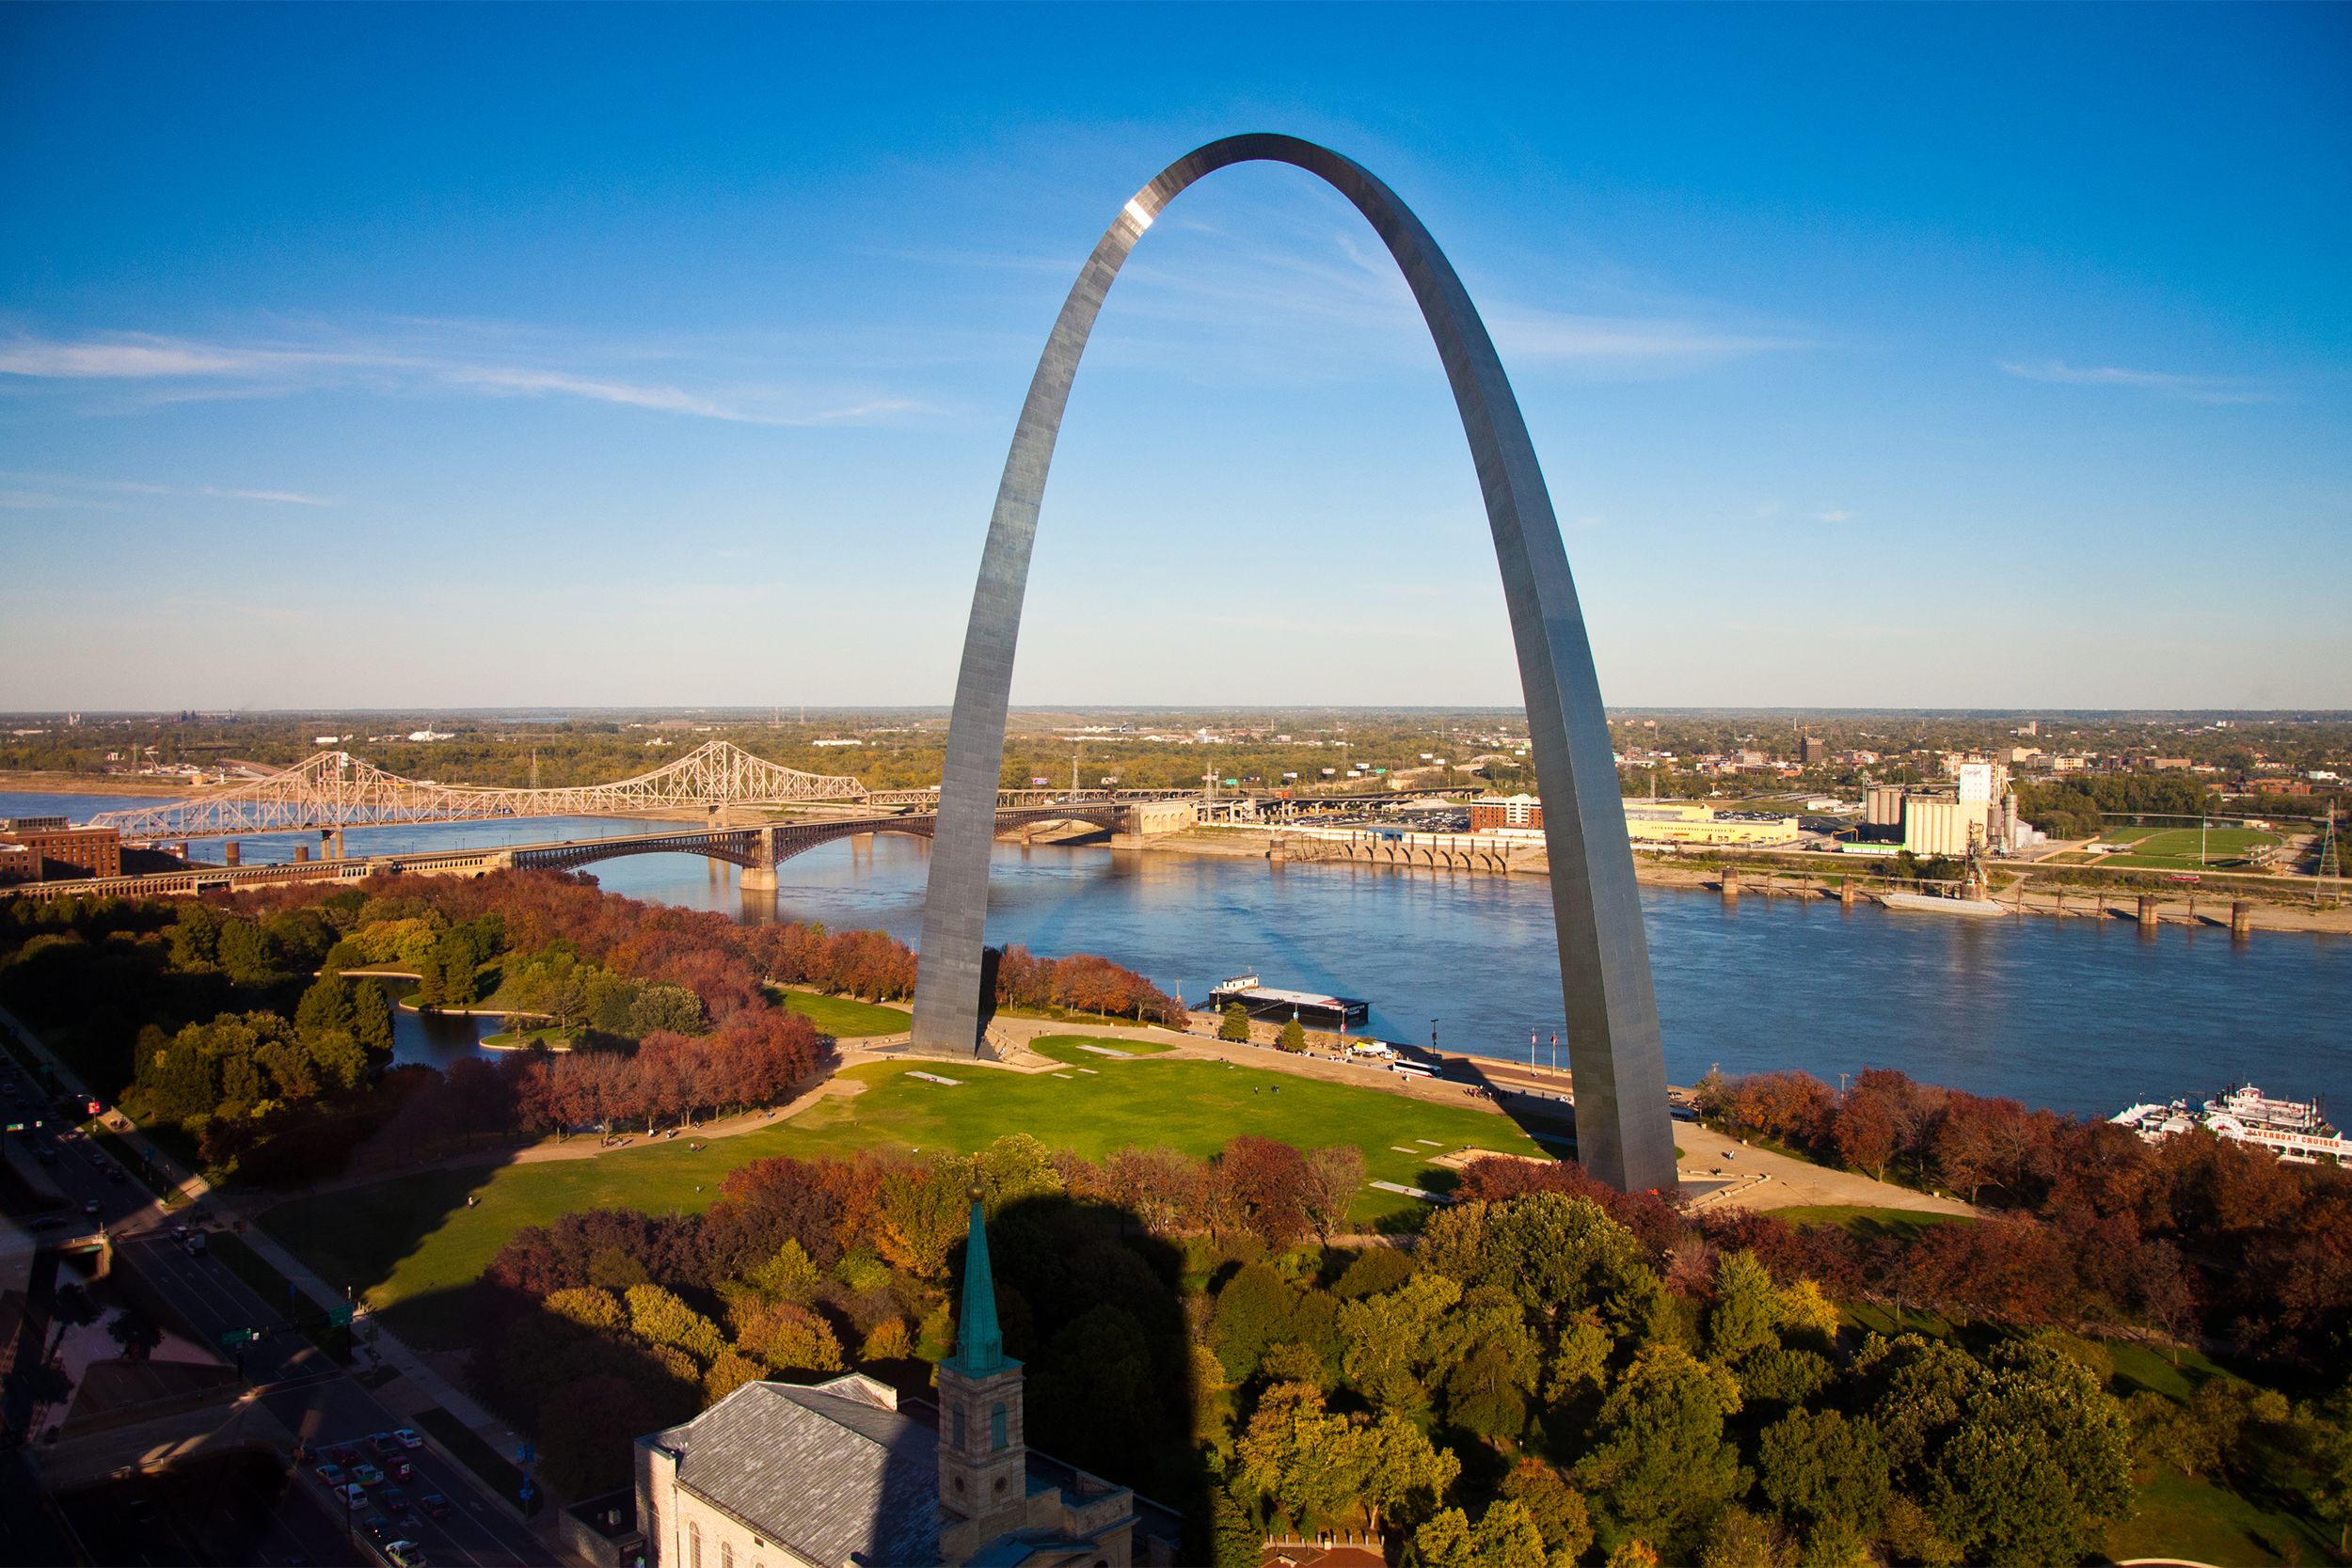 <p>Nicknamed the "Gateway to the West," <a href="https://www.nps.gov/jeff/index.htm">St. Louis' Gateway Arch</a> was built as a memorial to honor Thomas Jefferson's role in opening up America's western frontier. It is the tallest humanmade monument in the country. </p>